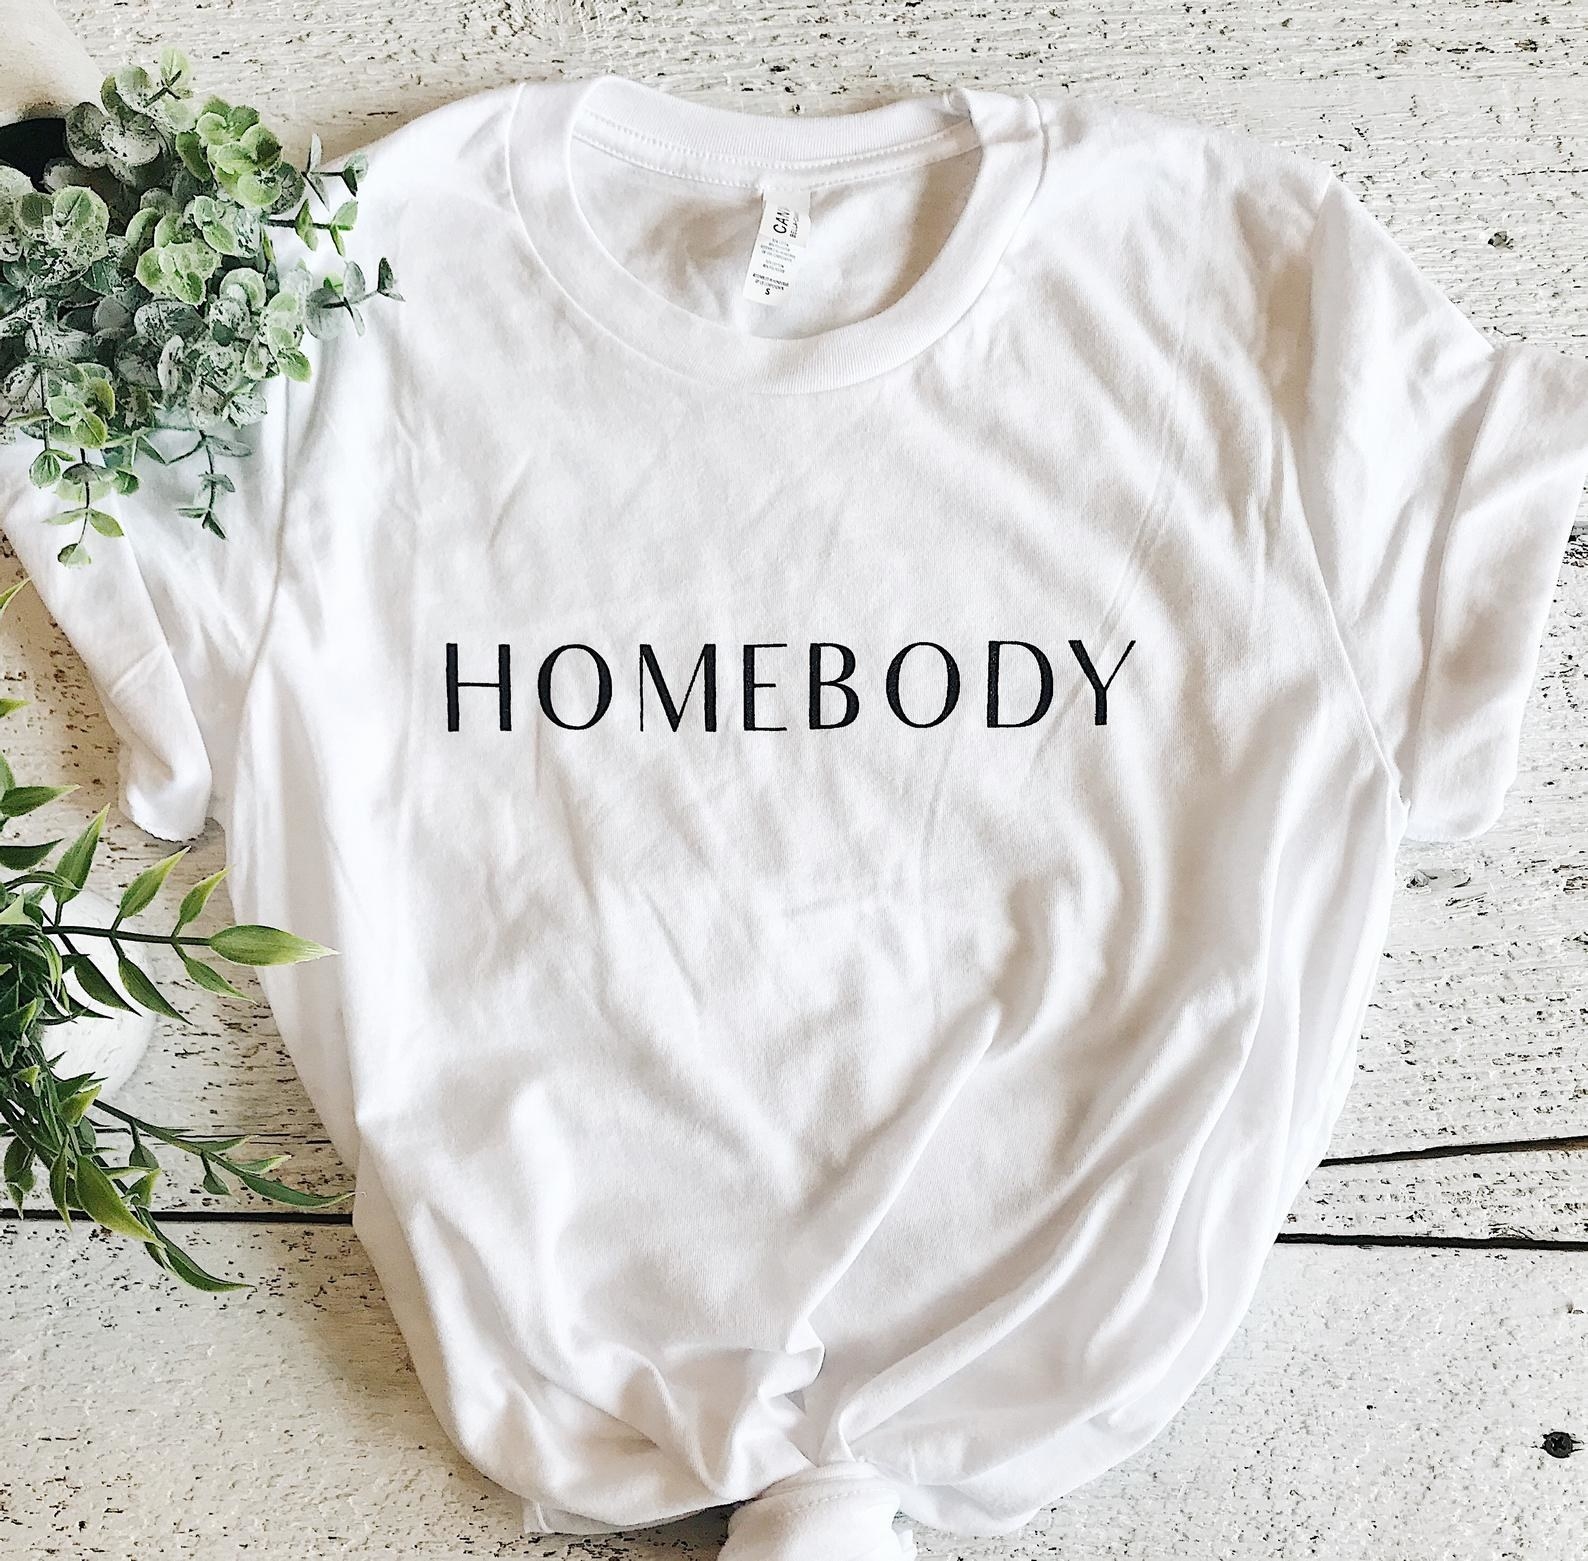 t shirt that says homebody on it